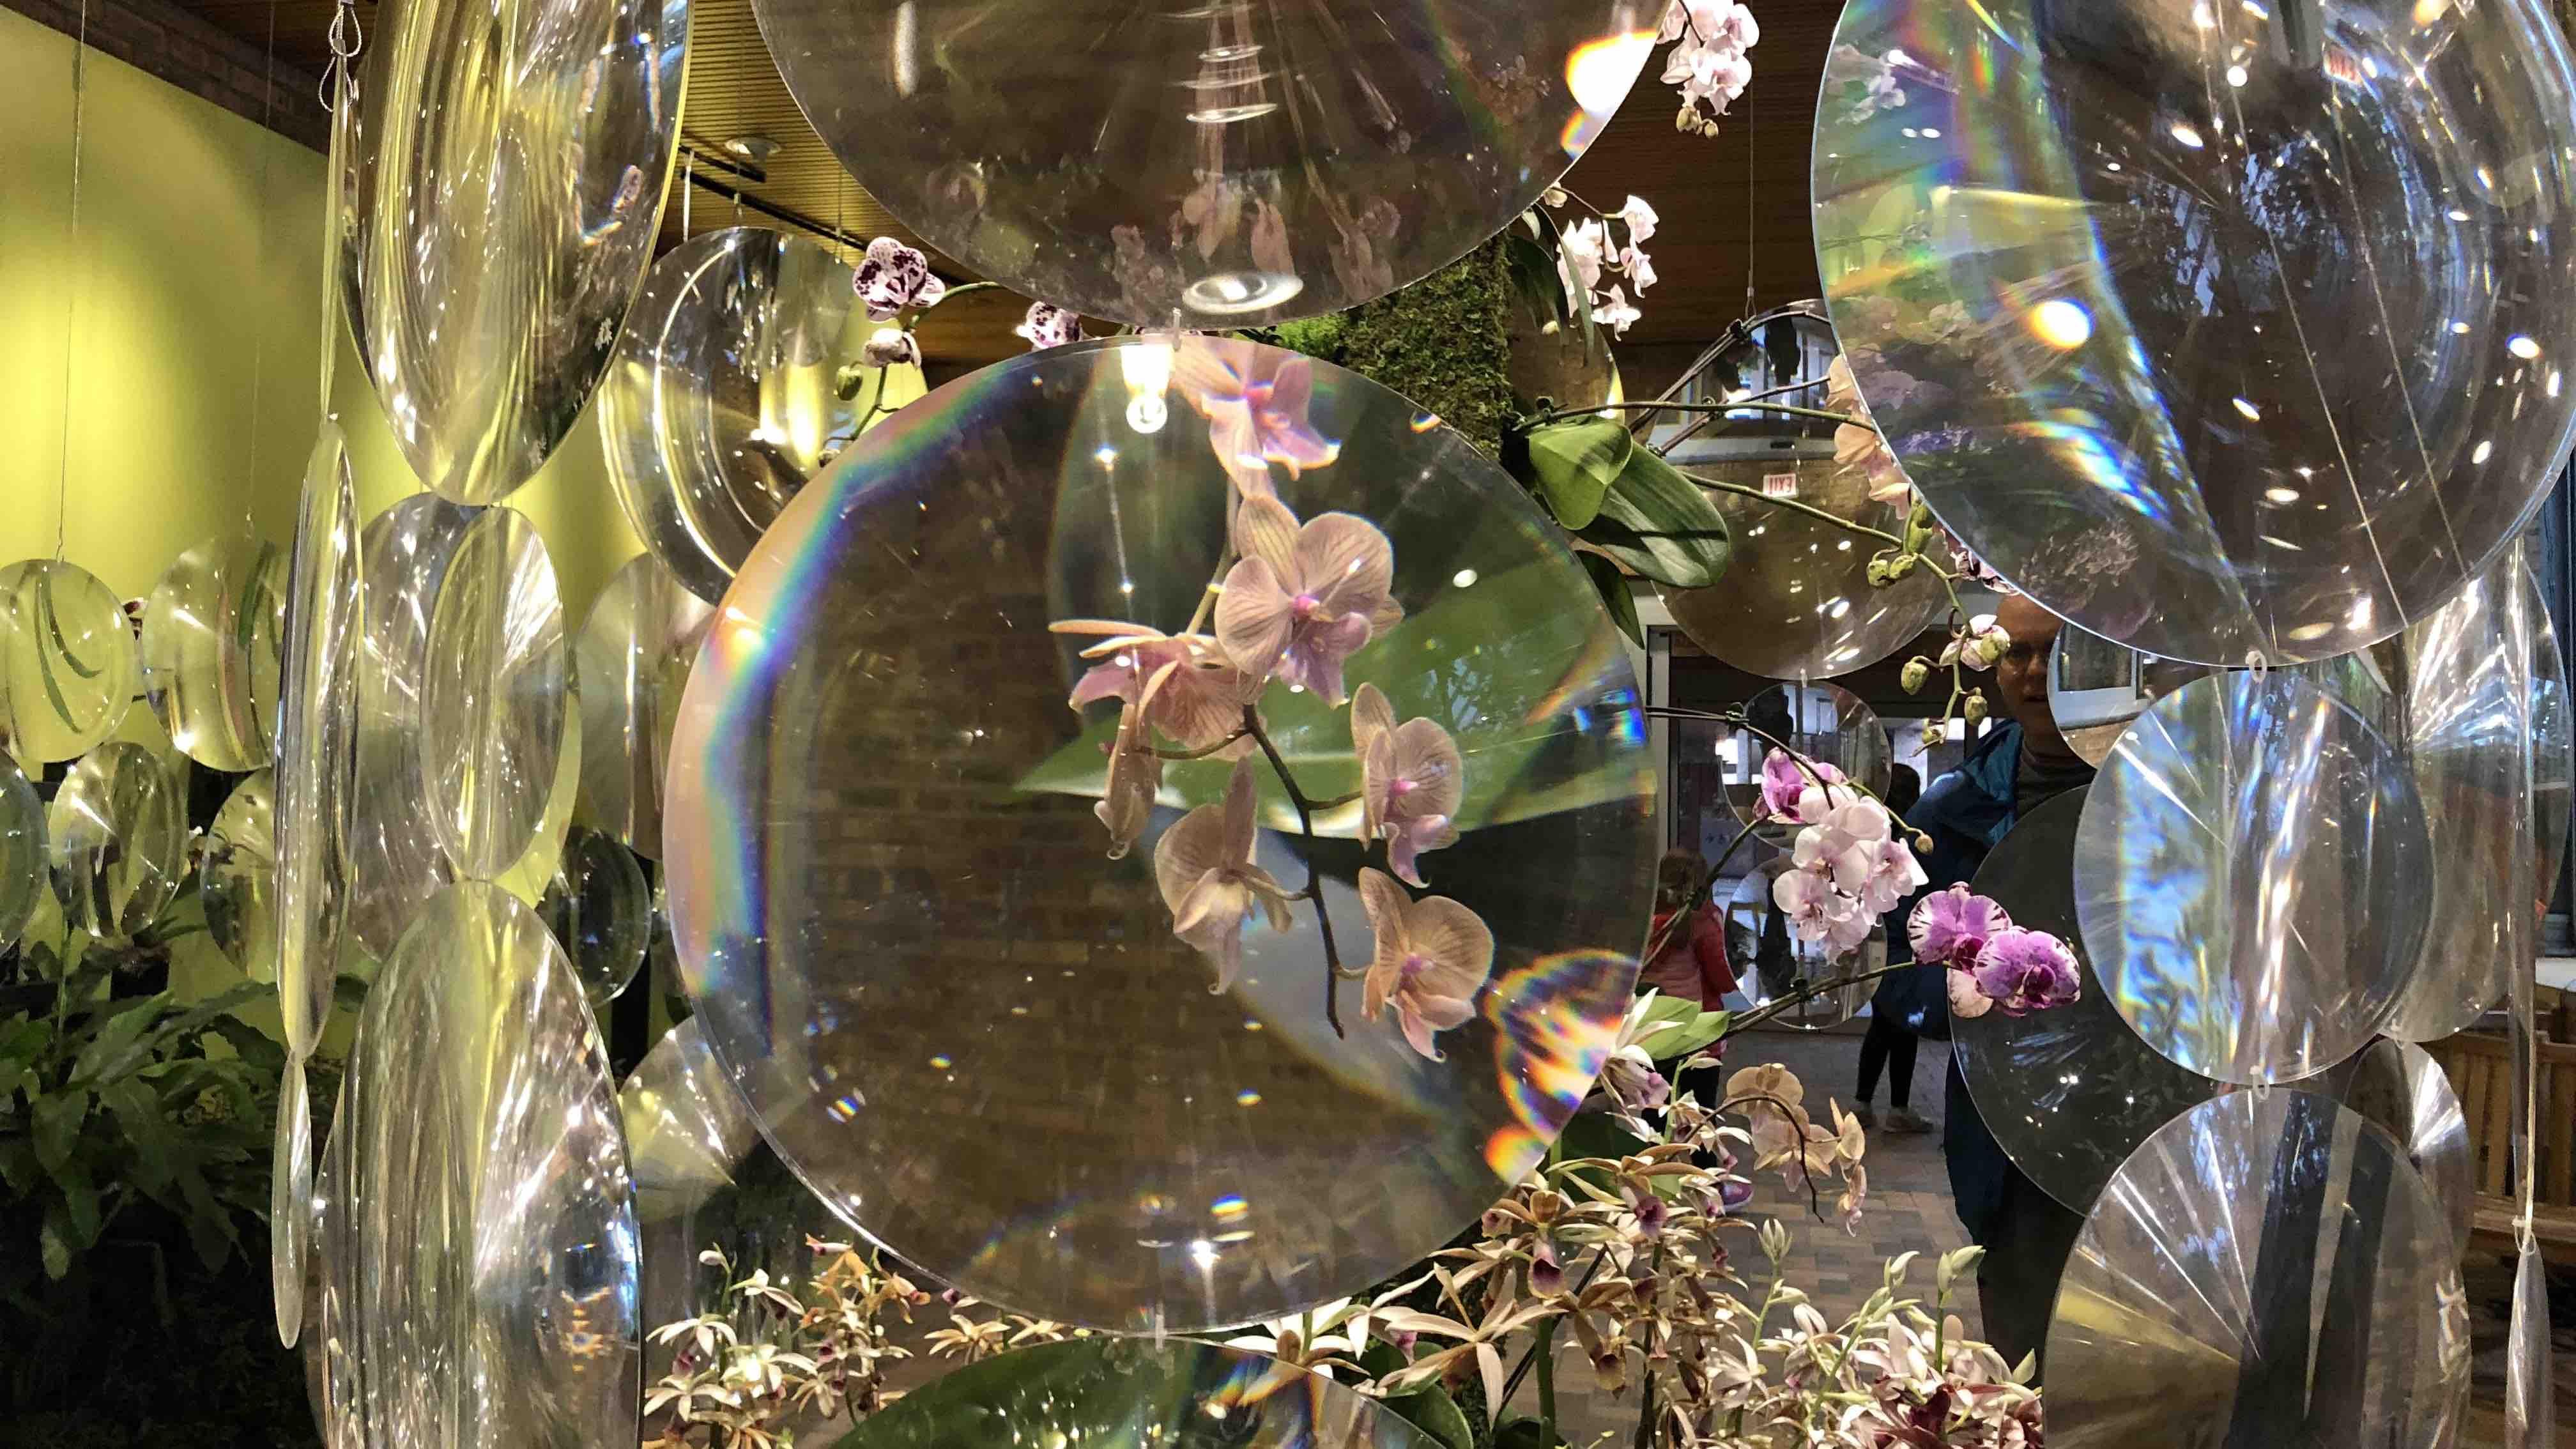 Fresnel lenses, found in lighthouses, are used in the orchid show to magnify the flowers' features. (Patty Wetli / WTTW News)